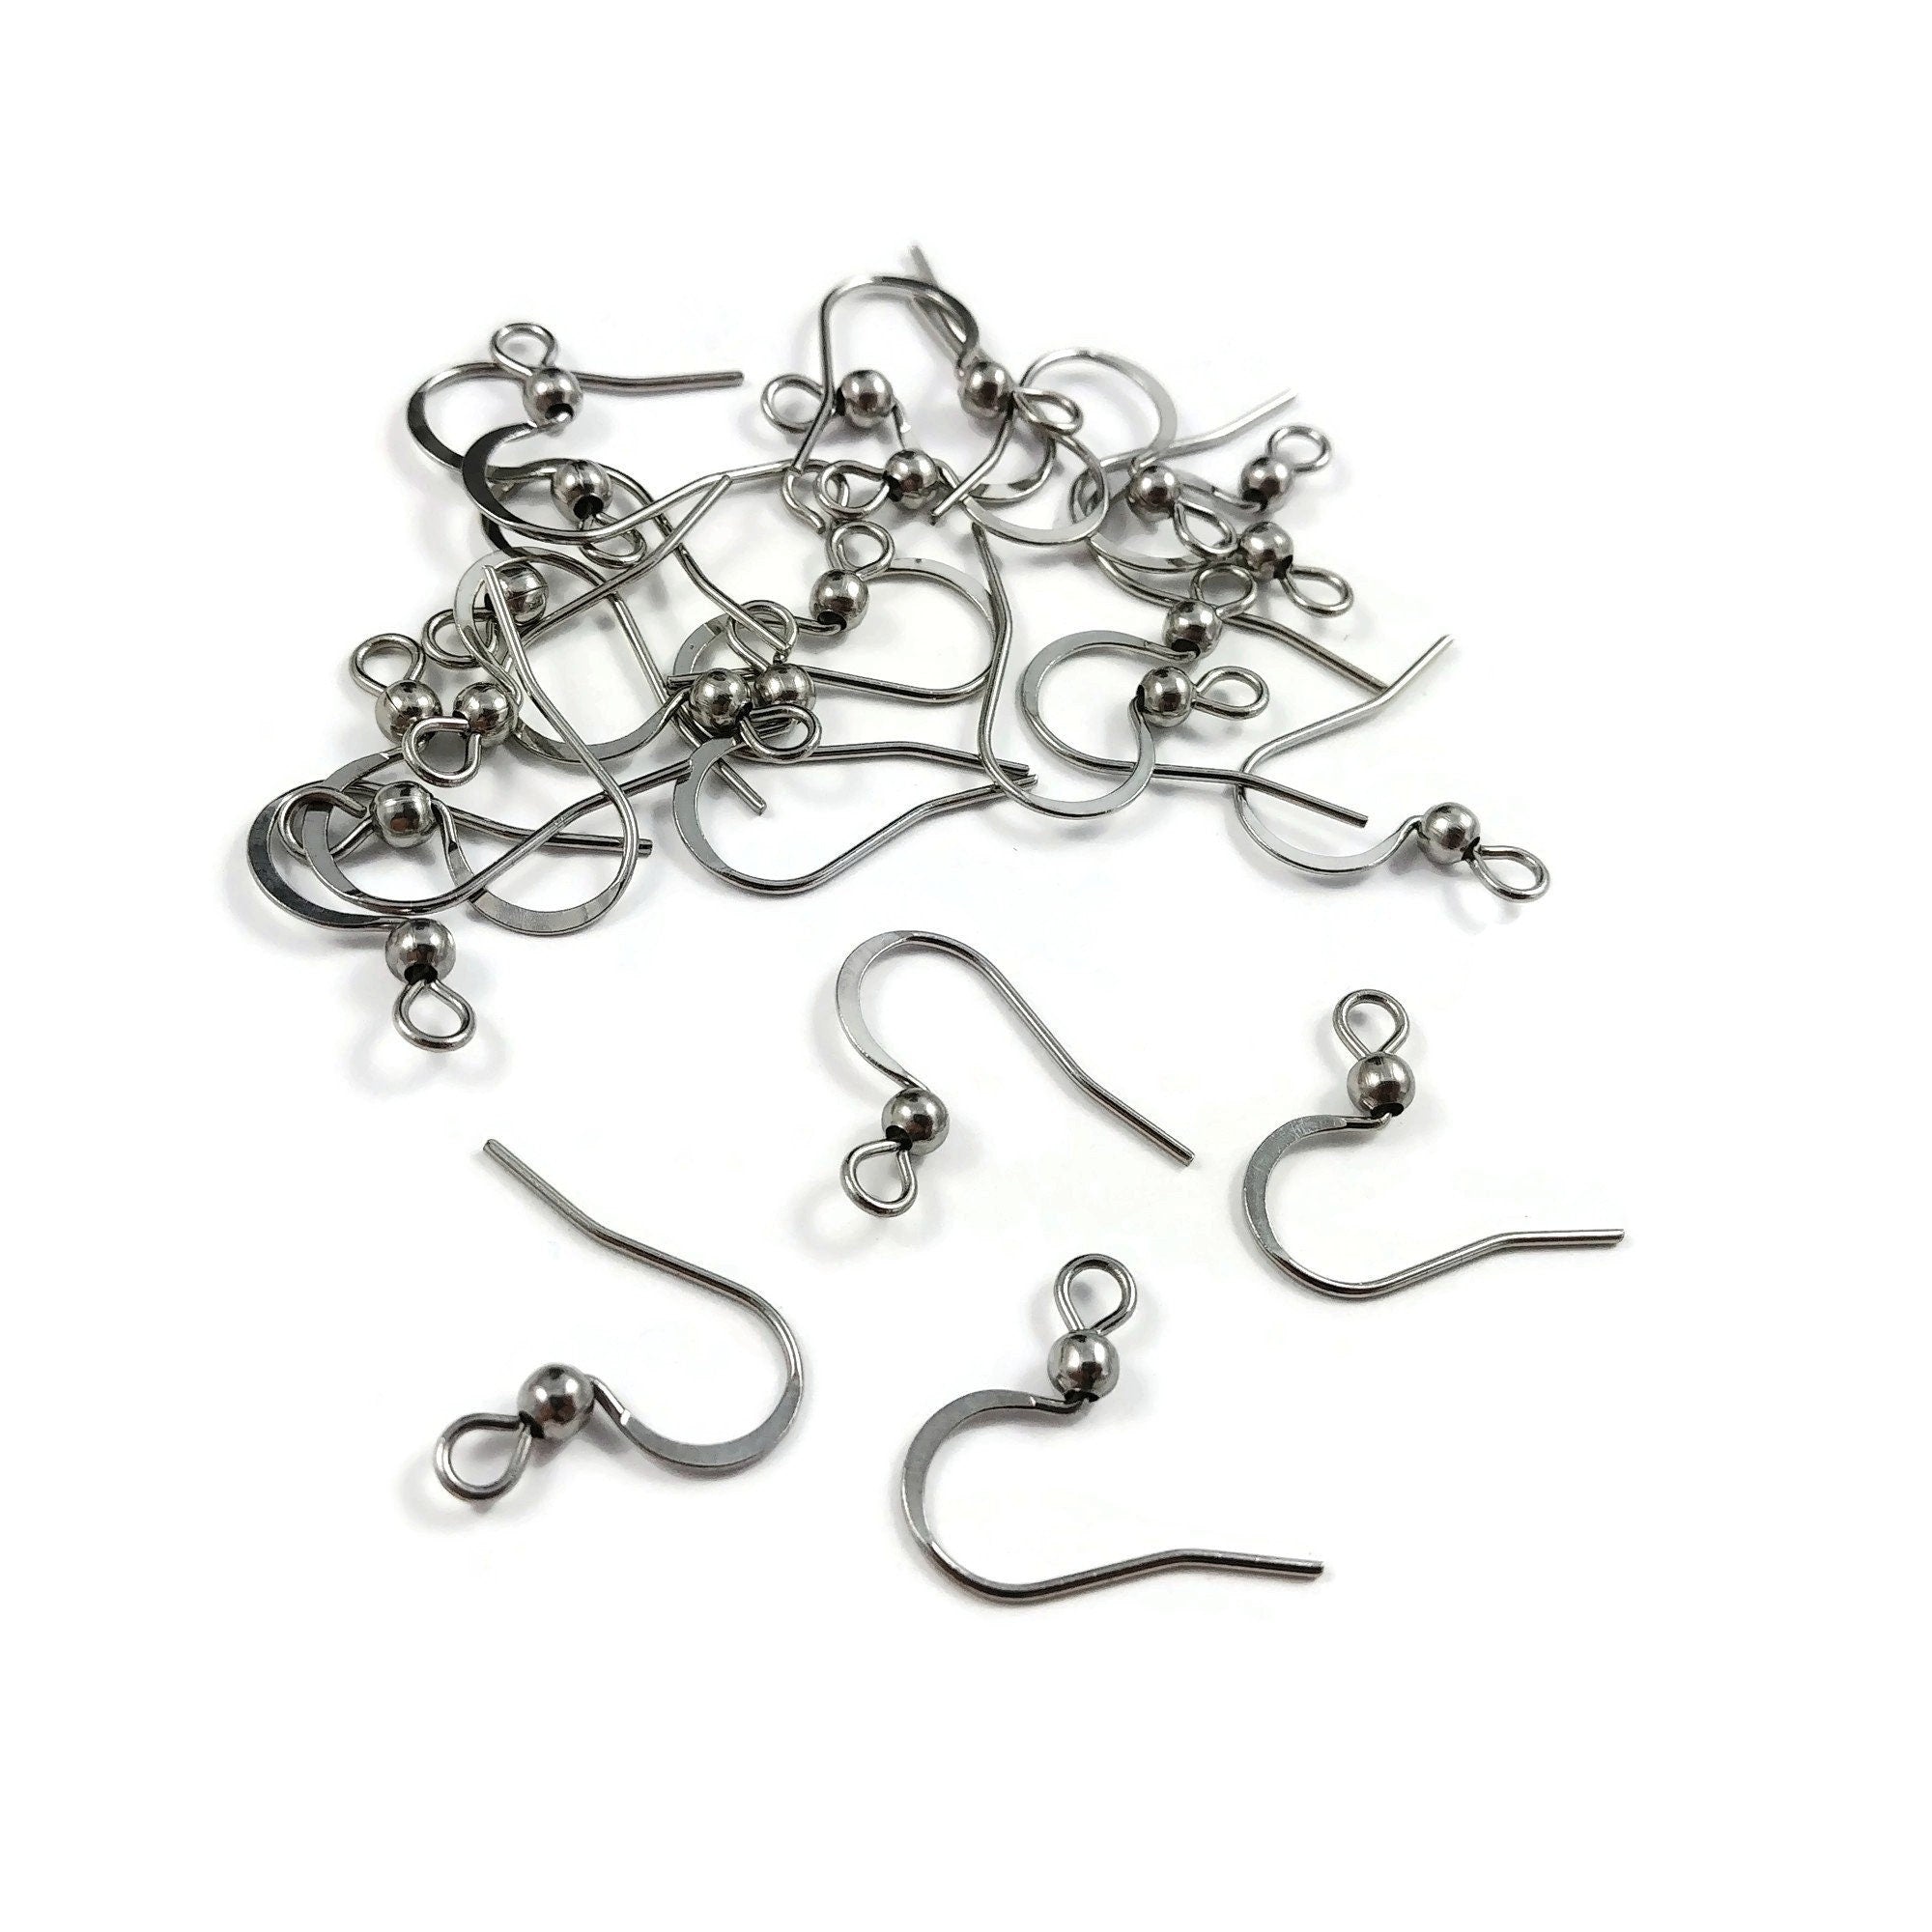 B-3 GOLD Stainless Steel Earring wires 316L stainless steel 25 pairs/ –  Campbells and Chaos